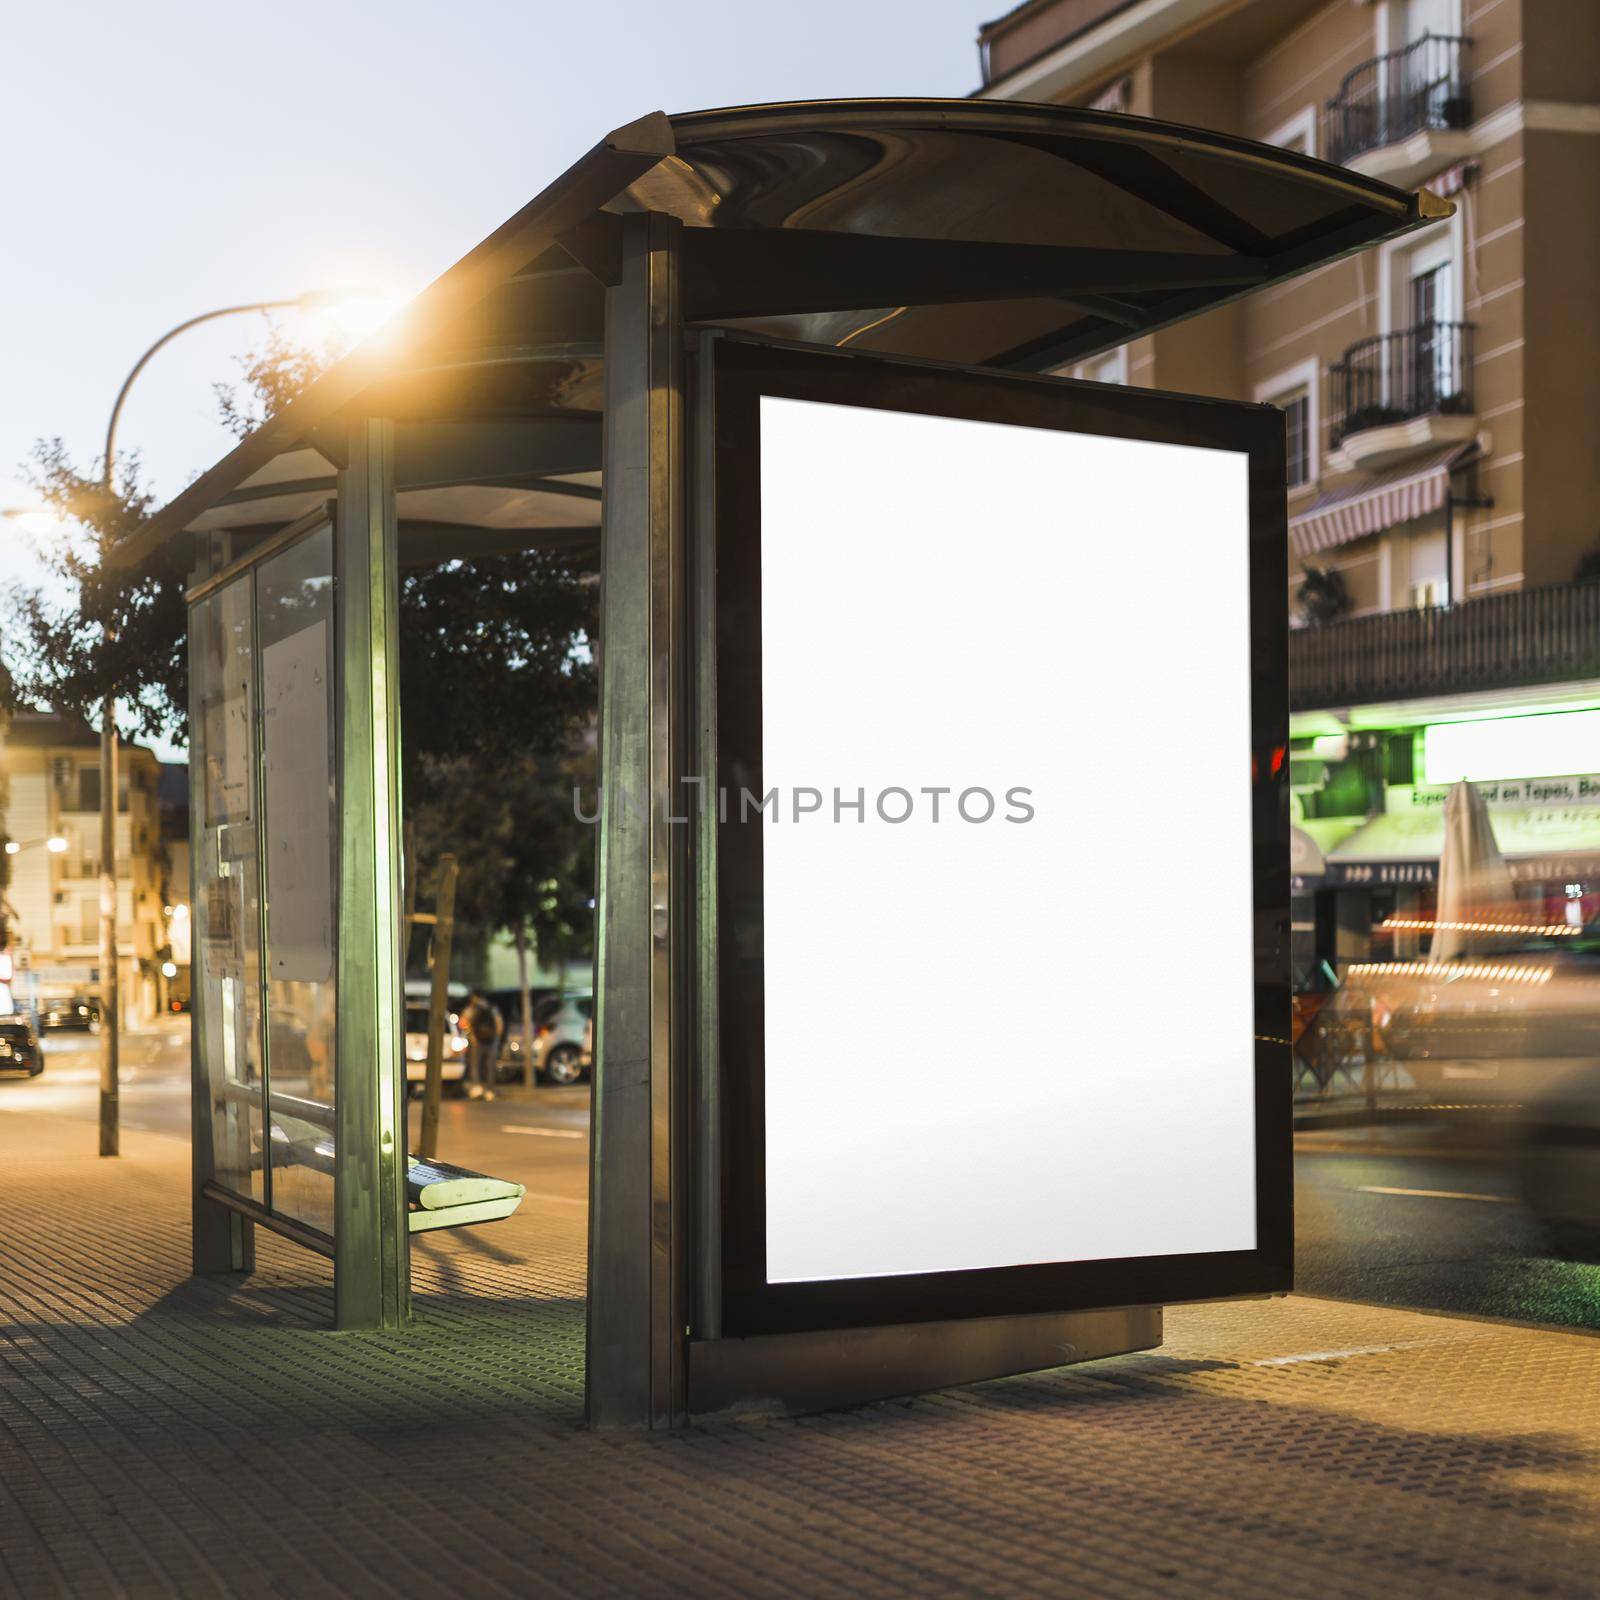 blank billboard bus stop shelter night 2. Resolution and high quality beautiful photo